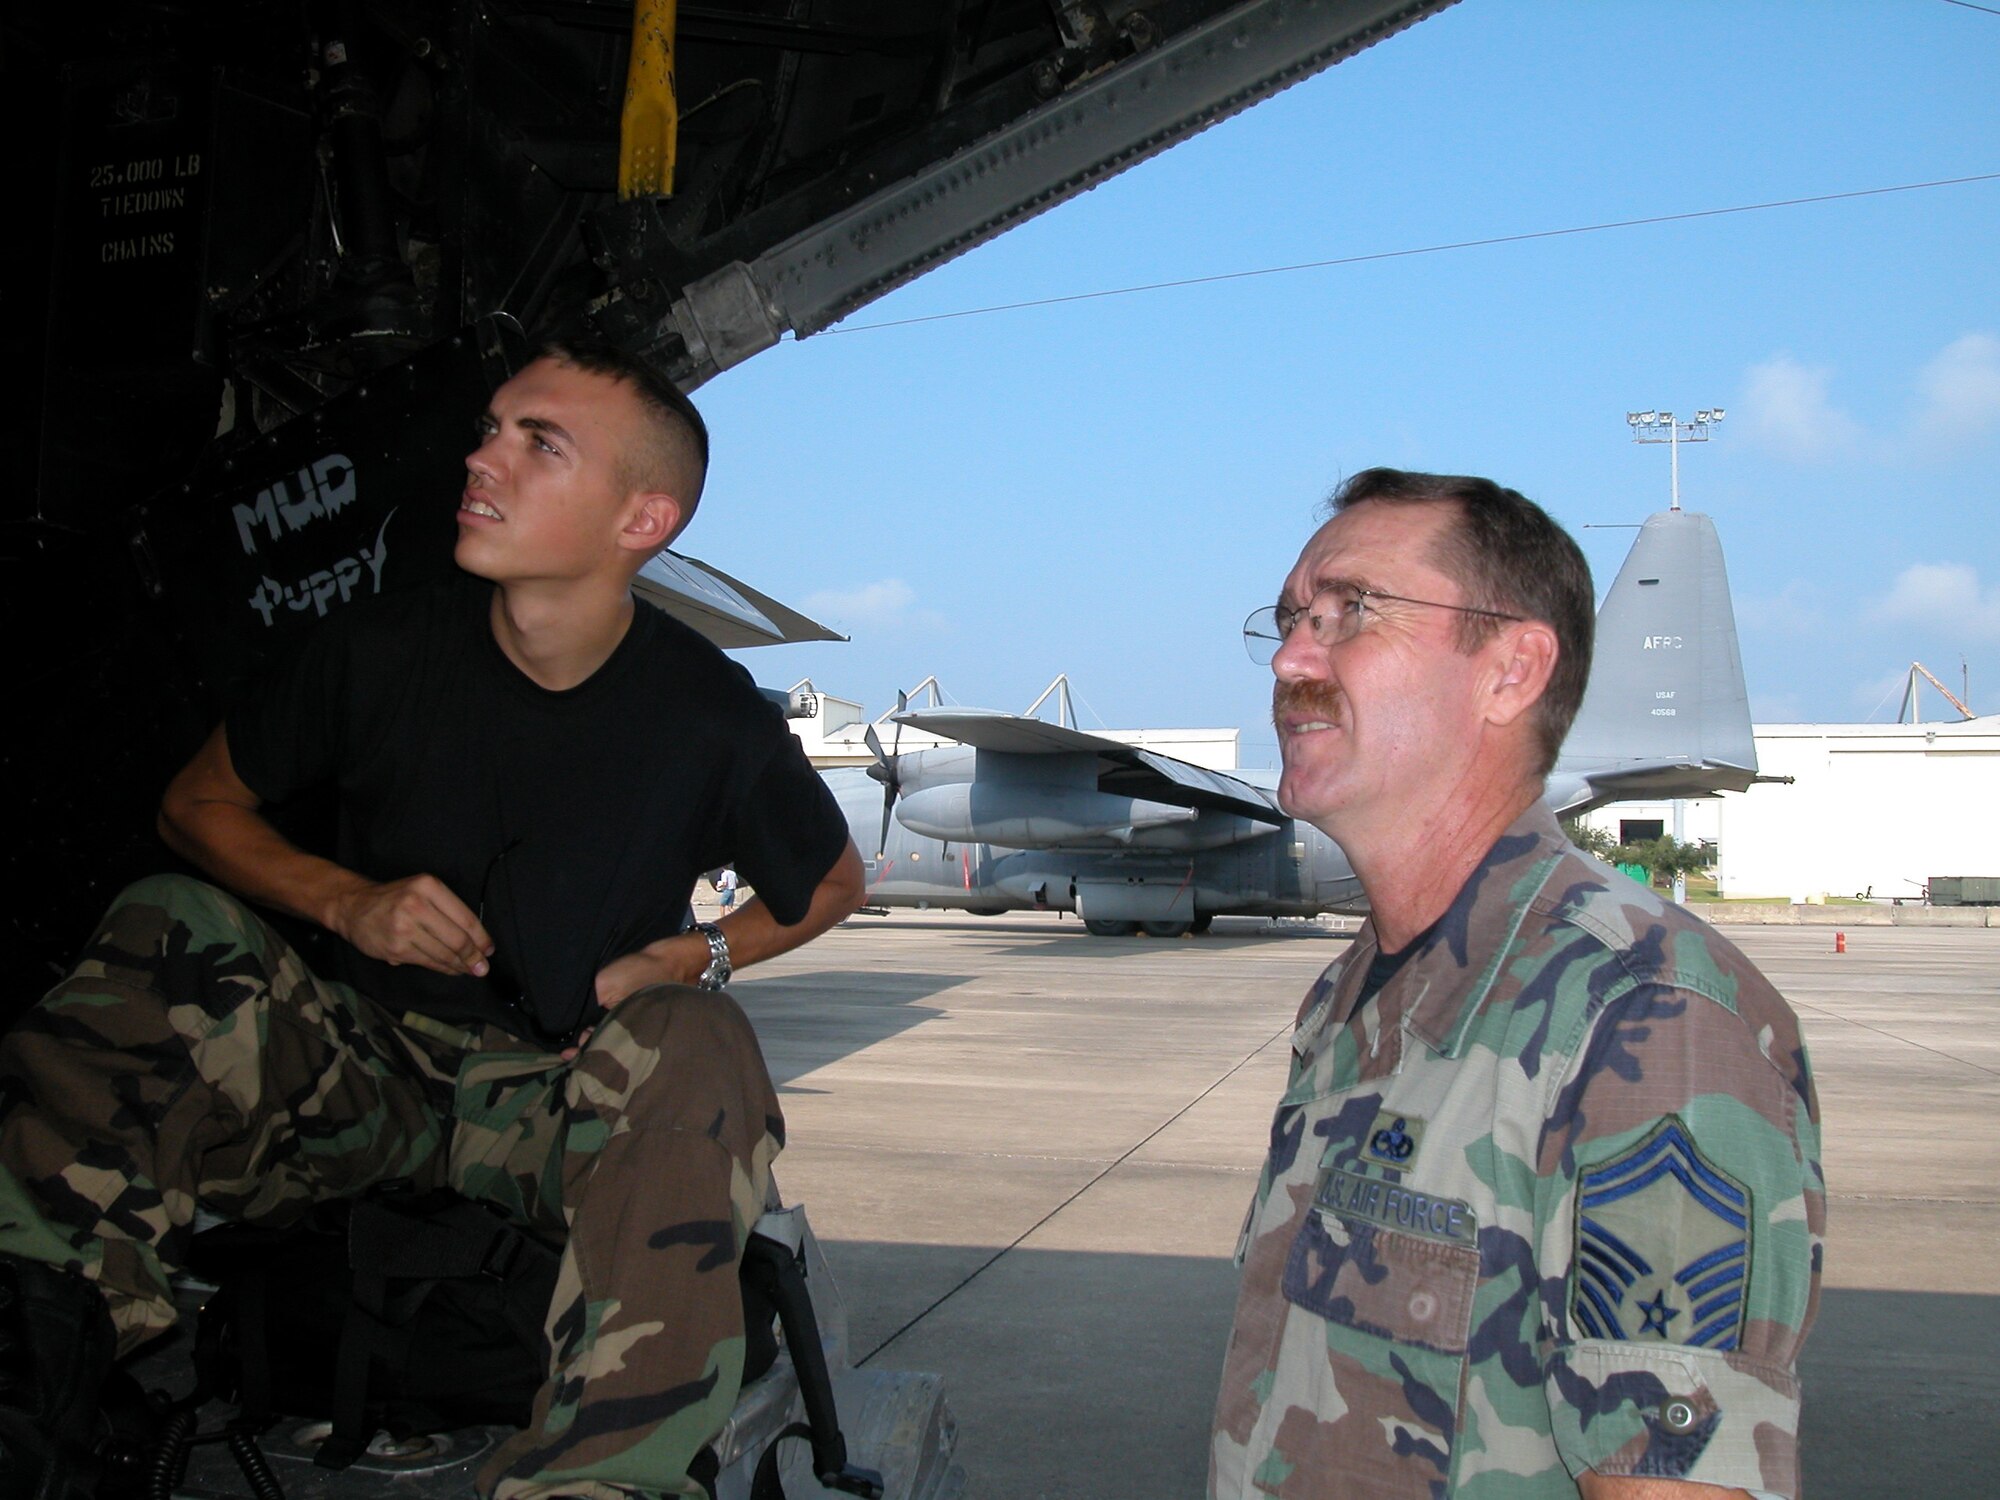 Chief Master Sgt. Phillip Bahm (then a senior master sergeant) chats with an Airman on the ramp of an MC-130E.  The chief was decorated for recovering an MC-130E aircraft during a daring mission in Afghanistan. (U.S. Air Force file photo)